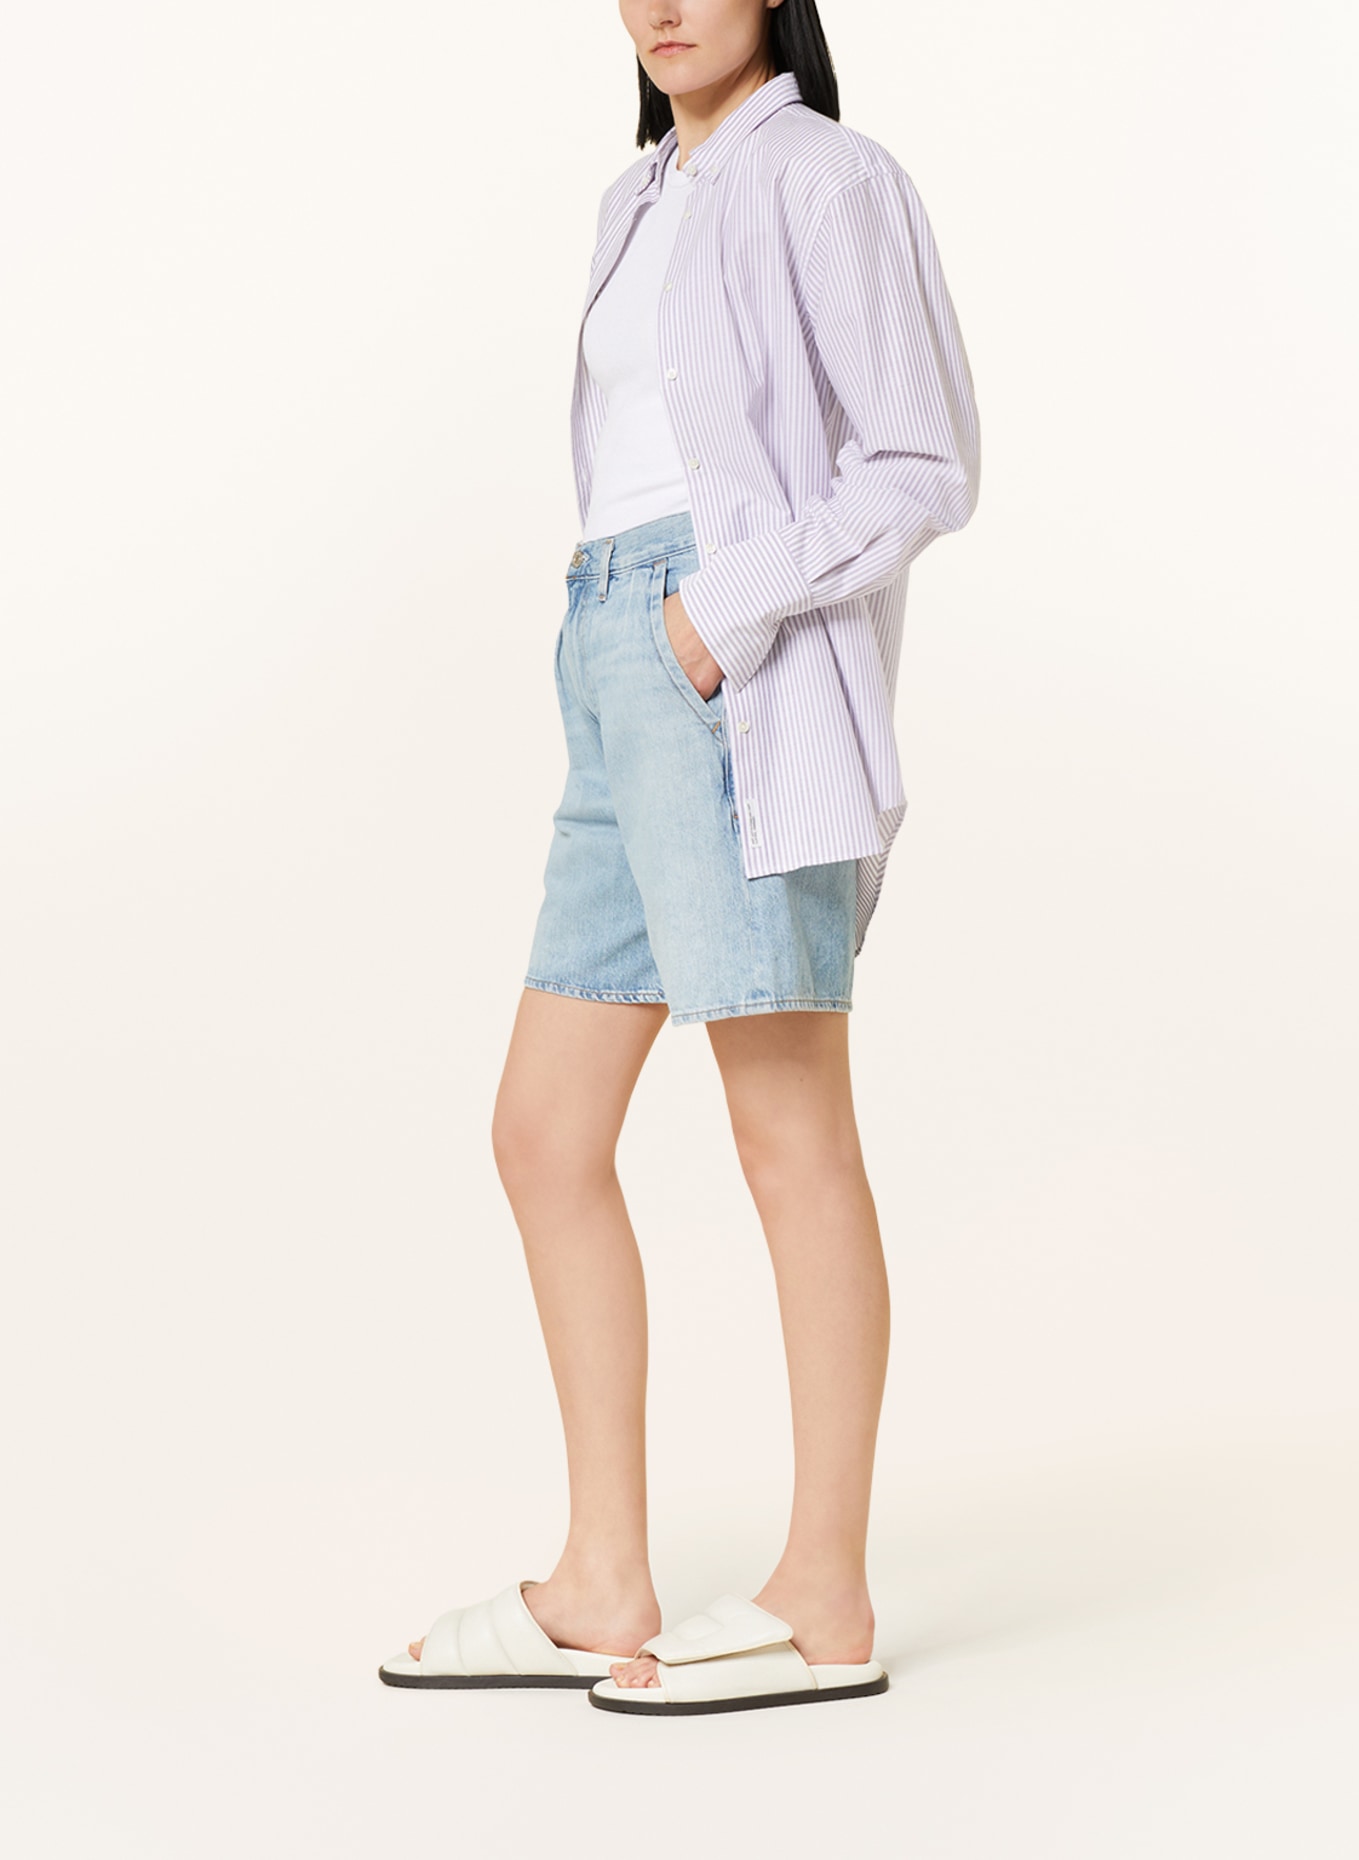 CITIZENS of HUMANITY Denim shorts MARITZY, Color: LIGHT BLUE (Image 4)